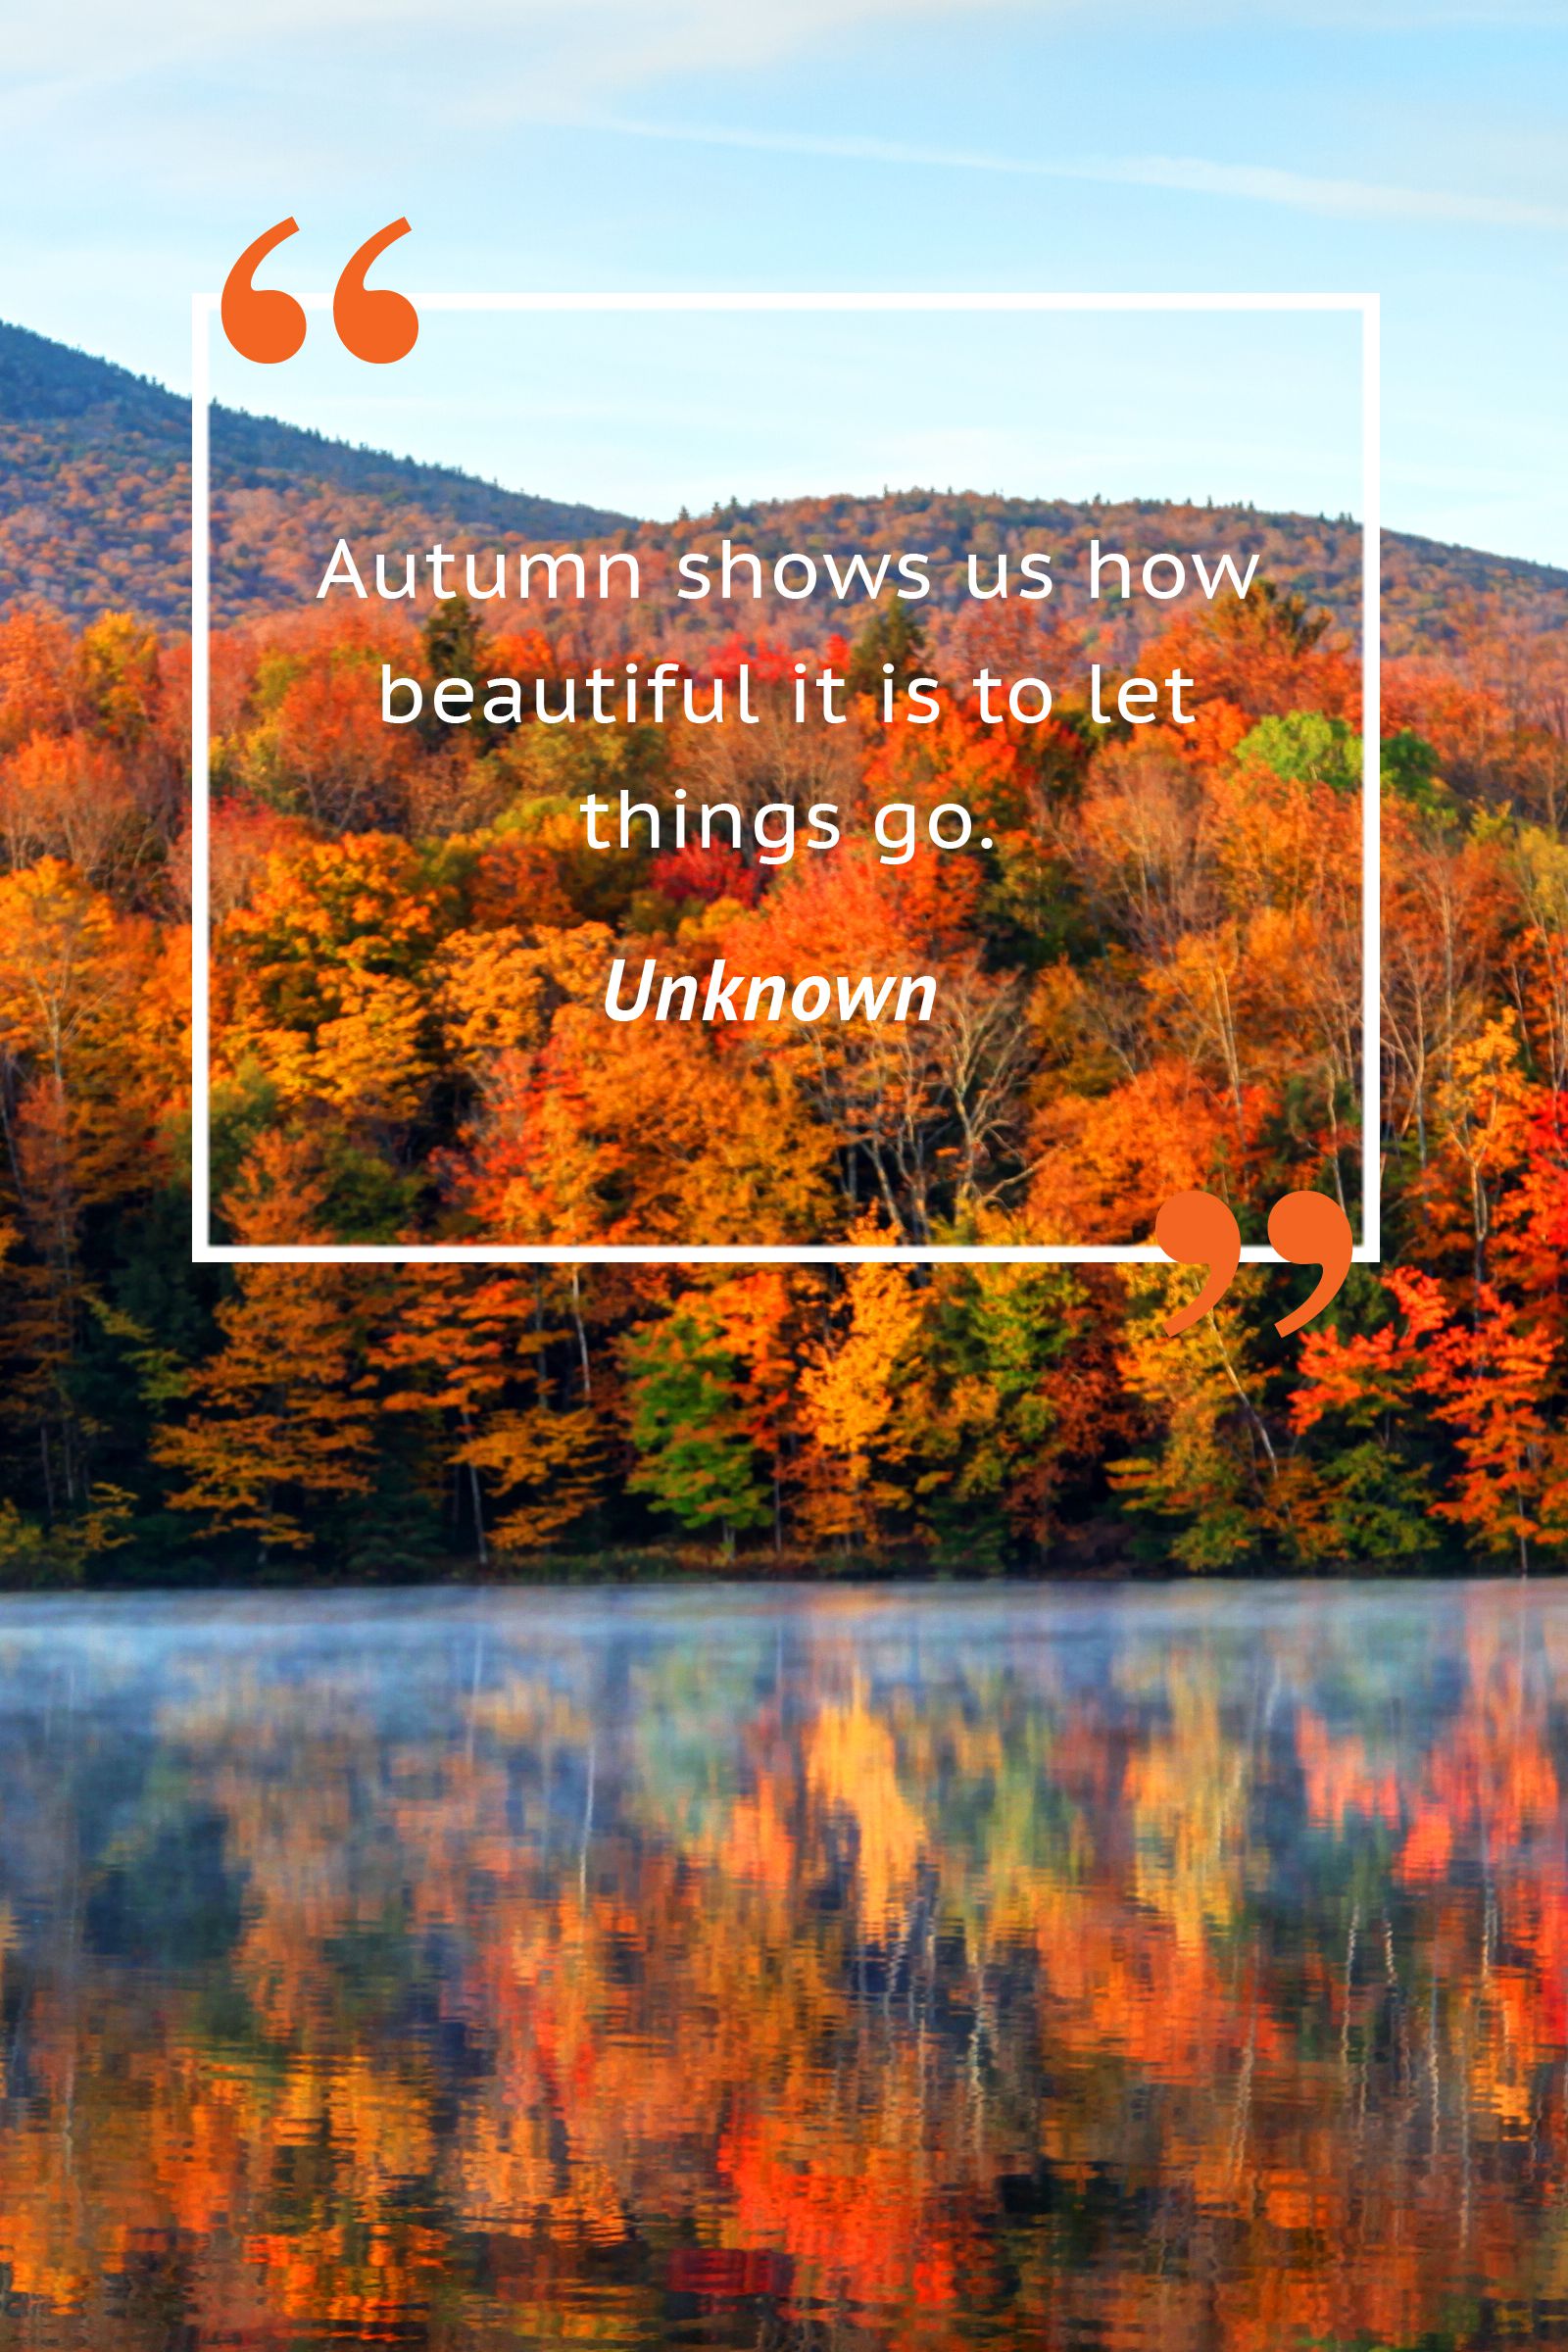 25 Fall Season Quotes - Best Sayings About Autumn